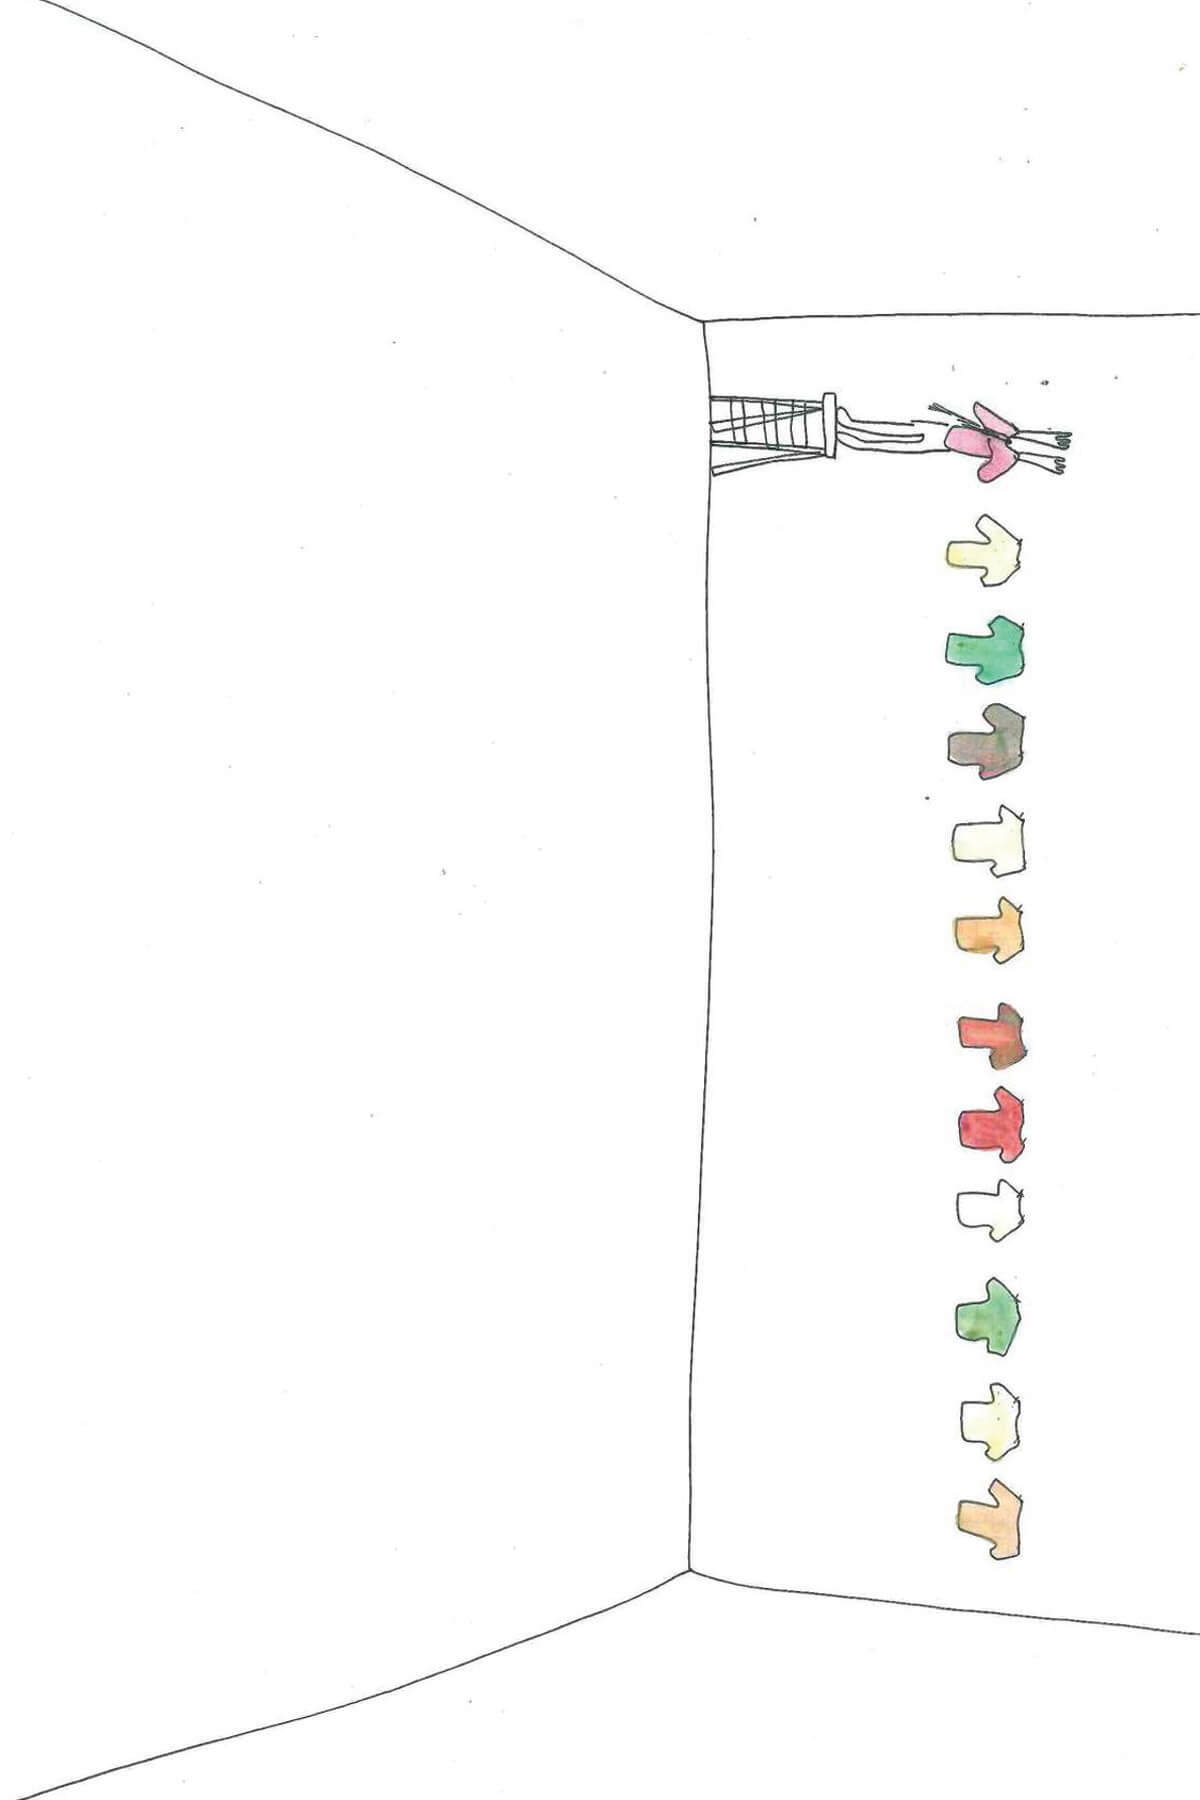 A simple line drawing on white, of a empty wall upon which 12 t-shirts are hung, in orange, green, gray, and white. On the far left, a figure stands on a stepladder and extends their arms up into the left-most pink t-shirt.